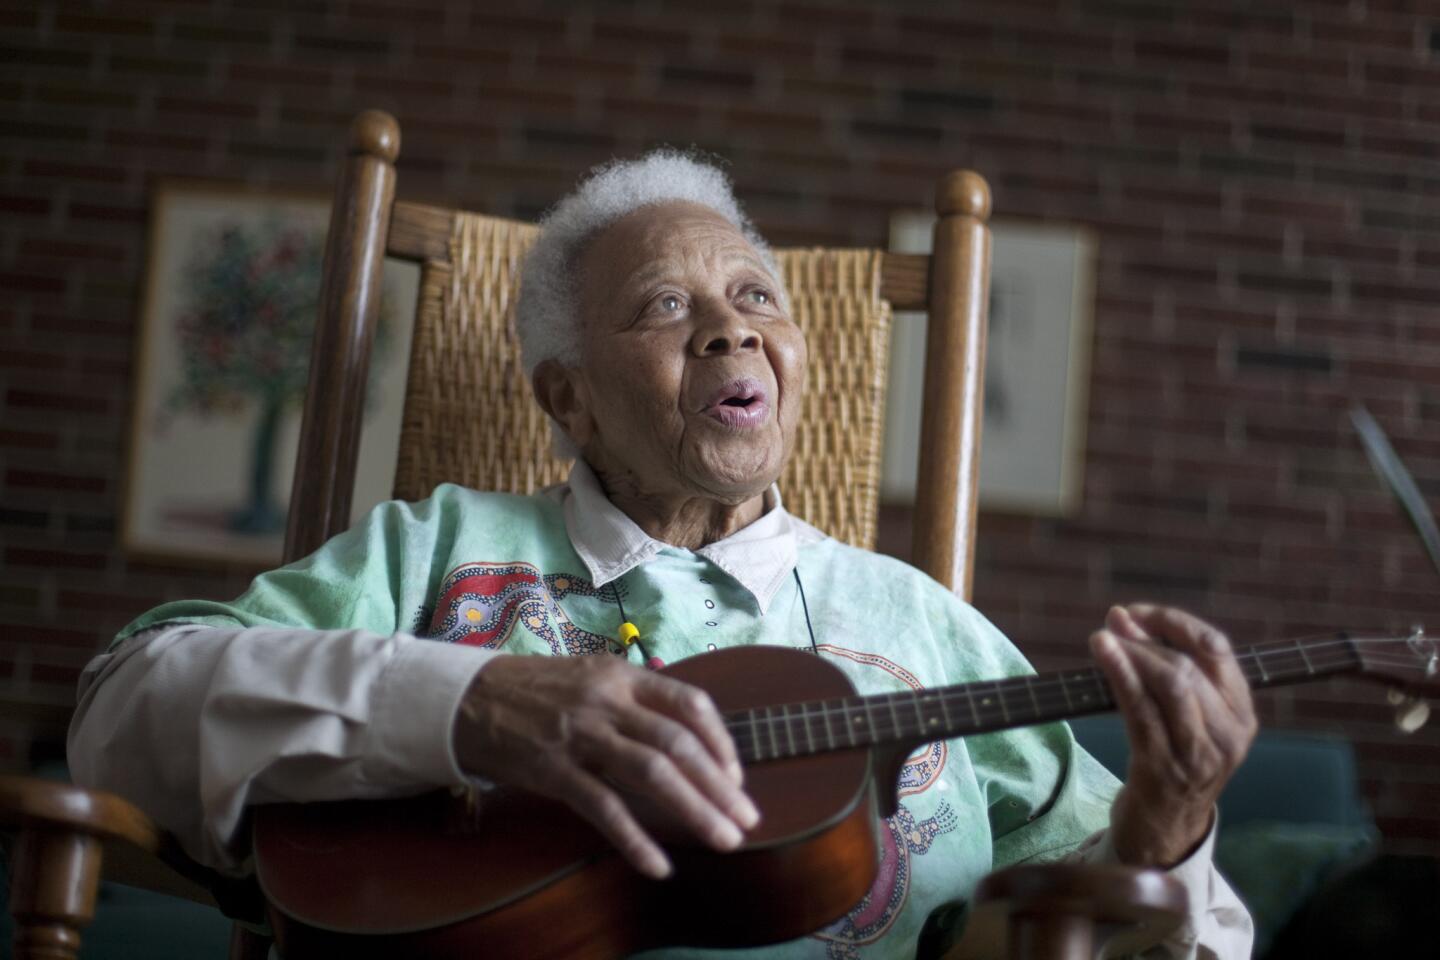 Catch if you can: Ella Jenkins (Friday, 12:30 p.m., Kidz): If you've never seen the First Lady of children's song perform, here's your chance. A Chicago treasure at age 88, she's as ingratiating and radiant as ever.